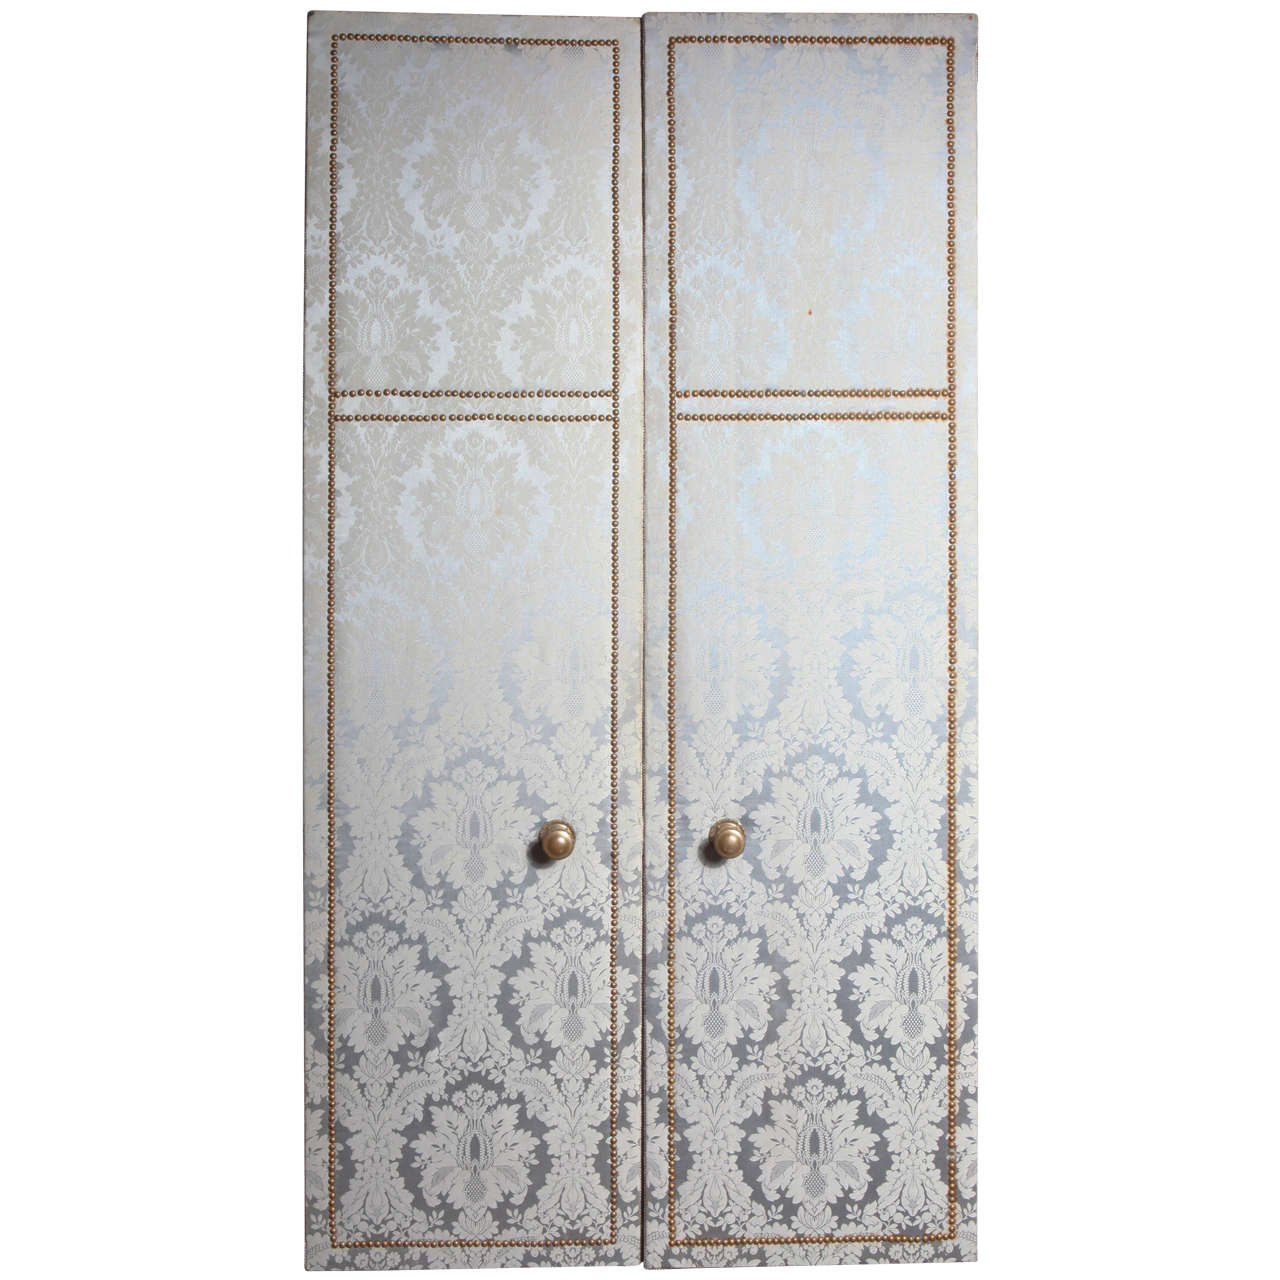 Early 20th Century Blue Damask Doors